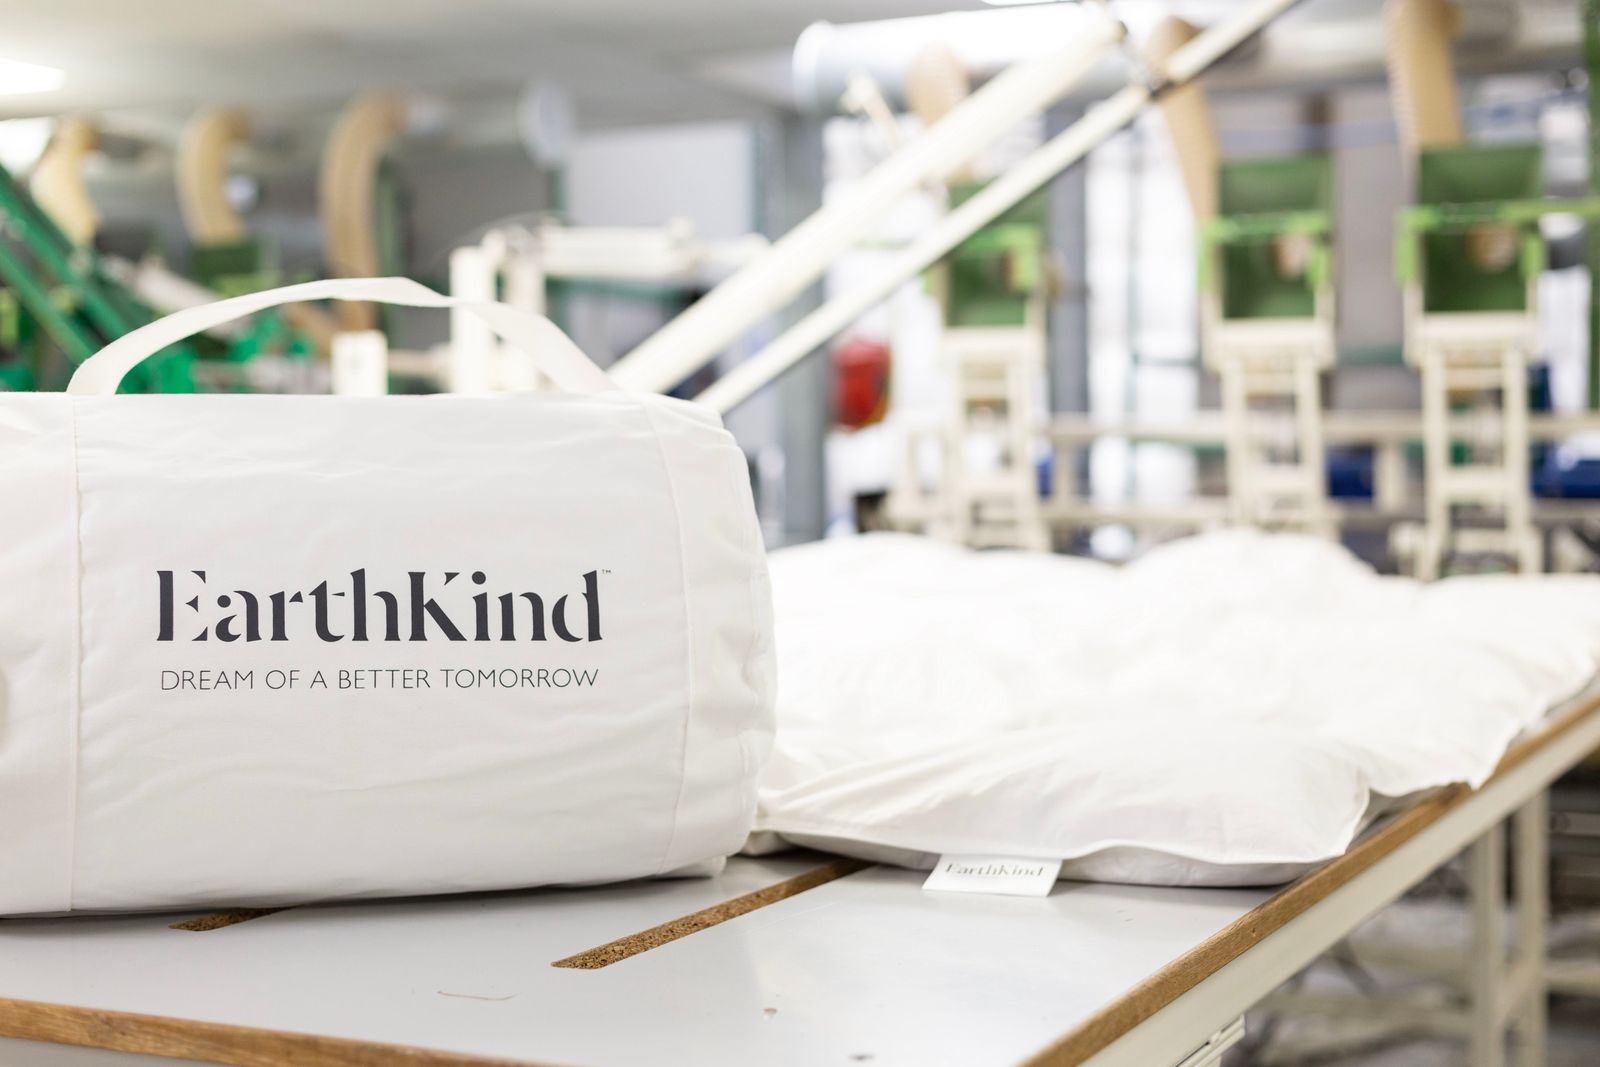 EarthKind pledges to double the amount of waste it recycles and saves from landfill in 2023